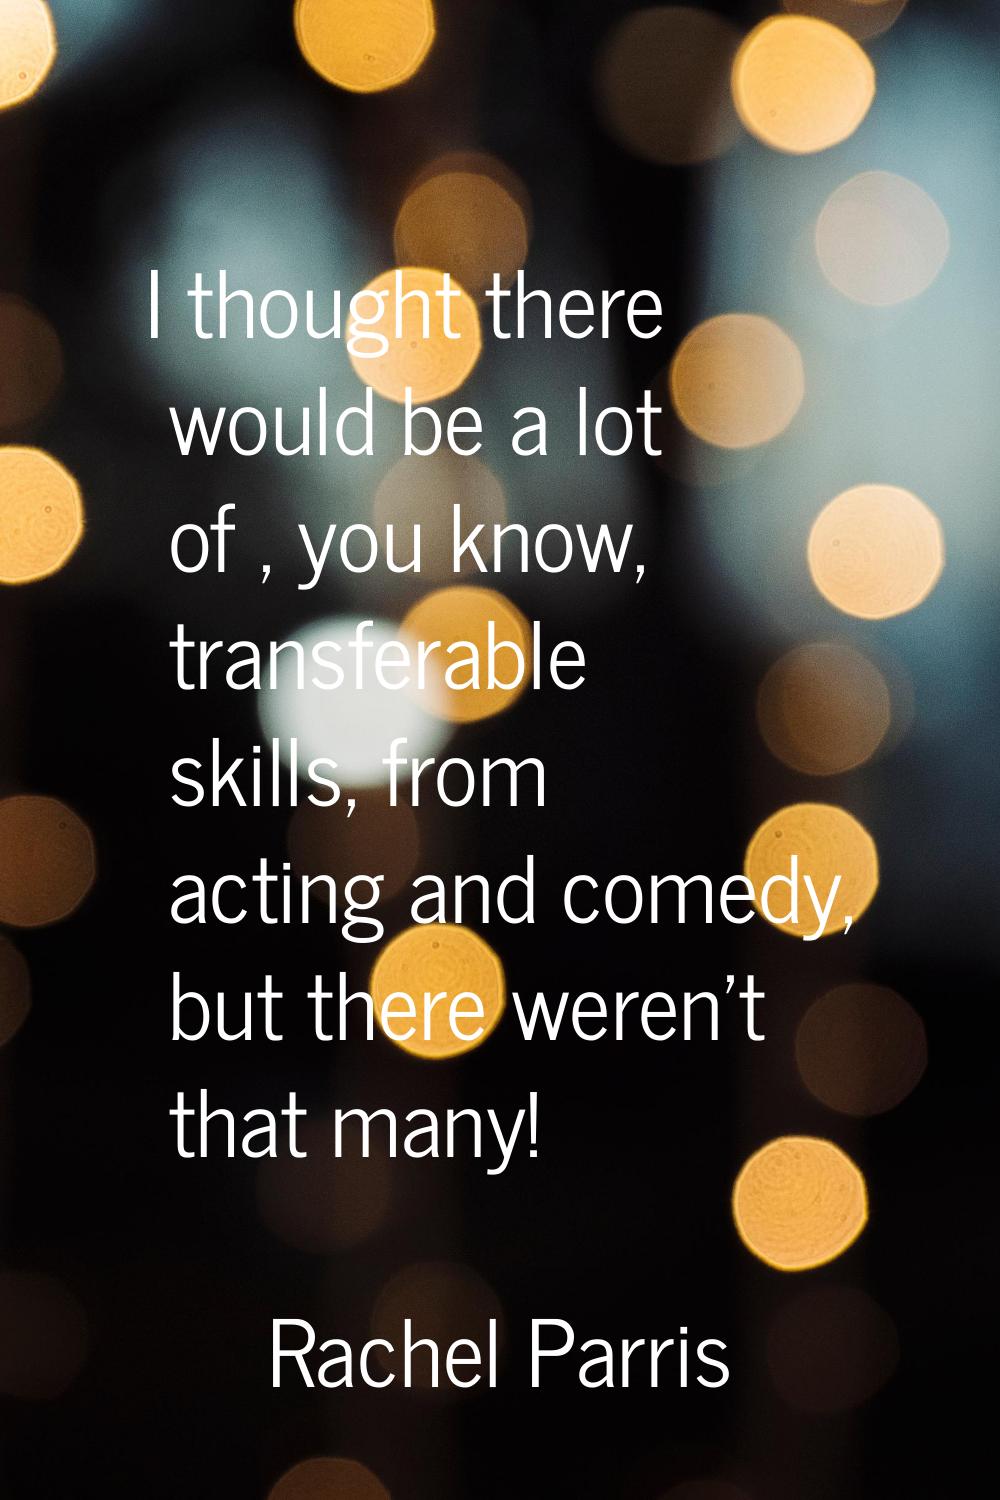 I thought there would be a lot of , you know, transferable skills, from acting and comedy, but ther